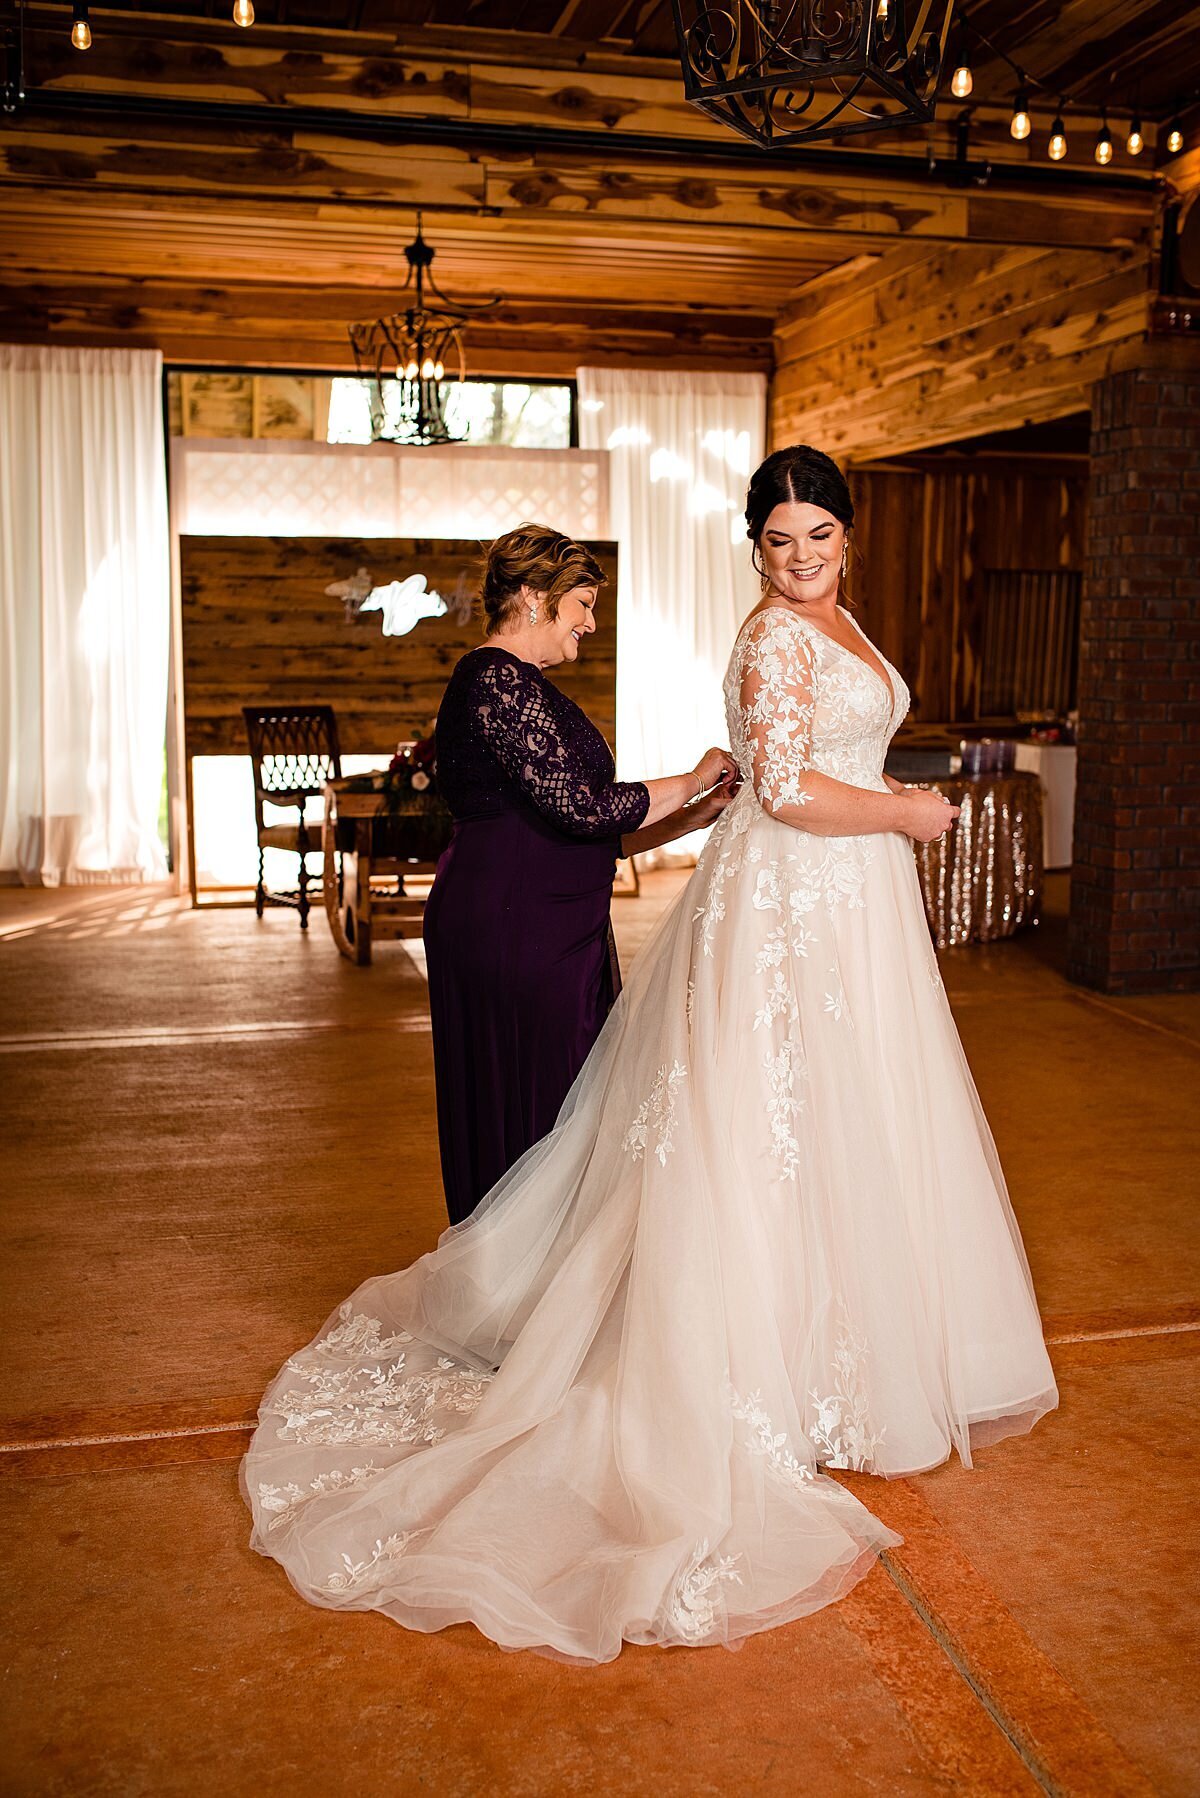 Mother of bride buttoning her daughter's wedding dress at Copper Ridge